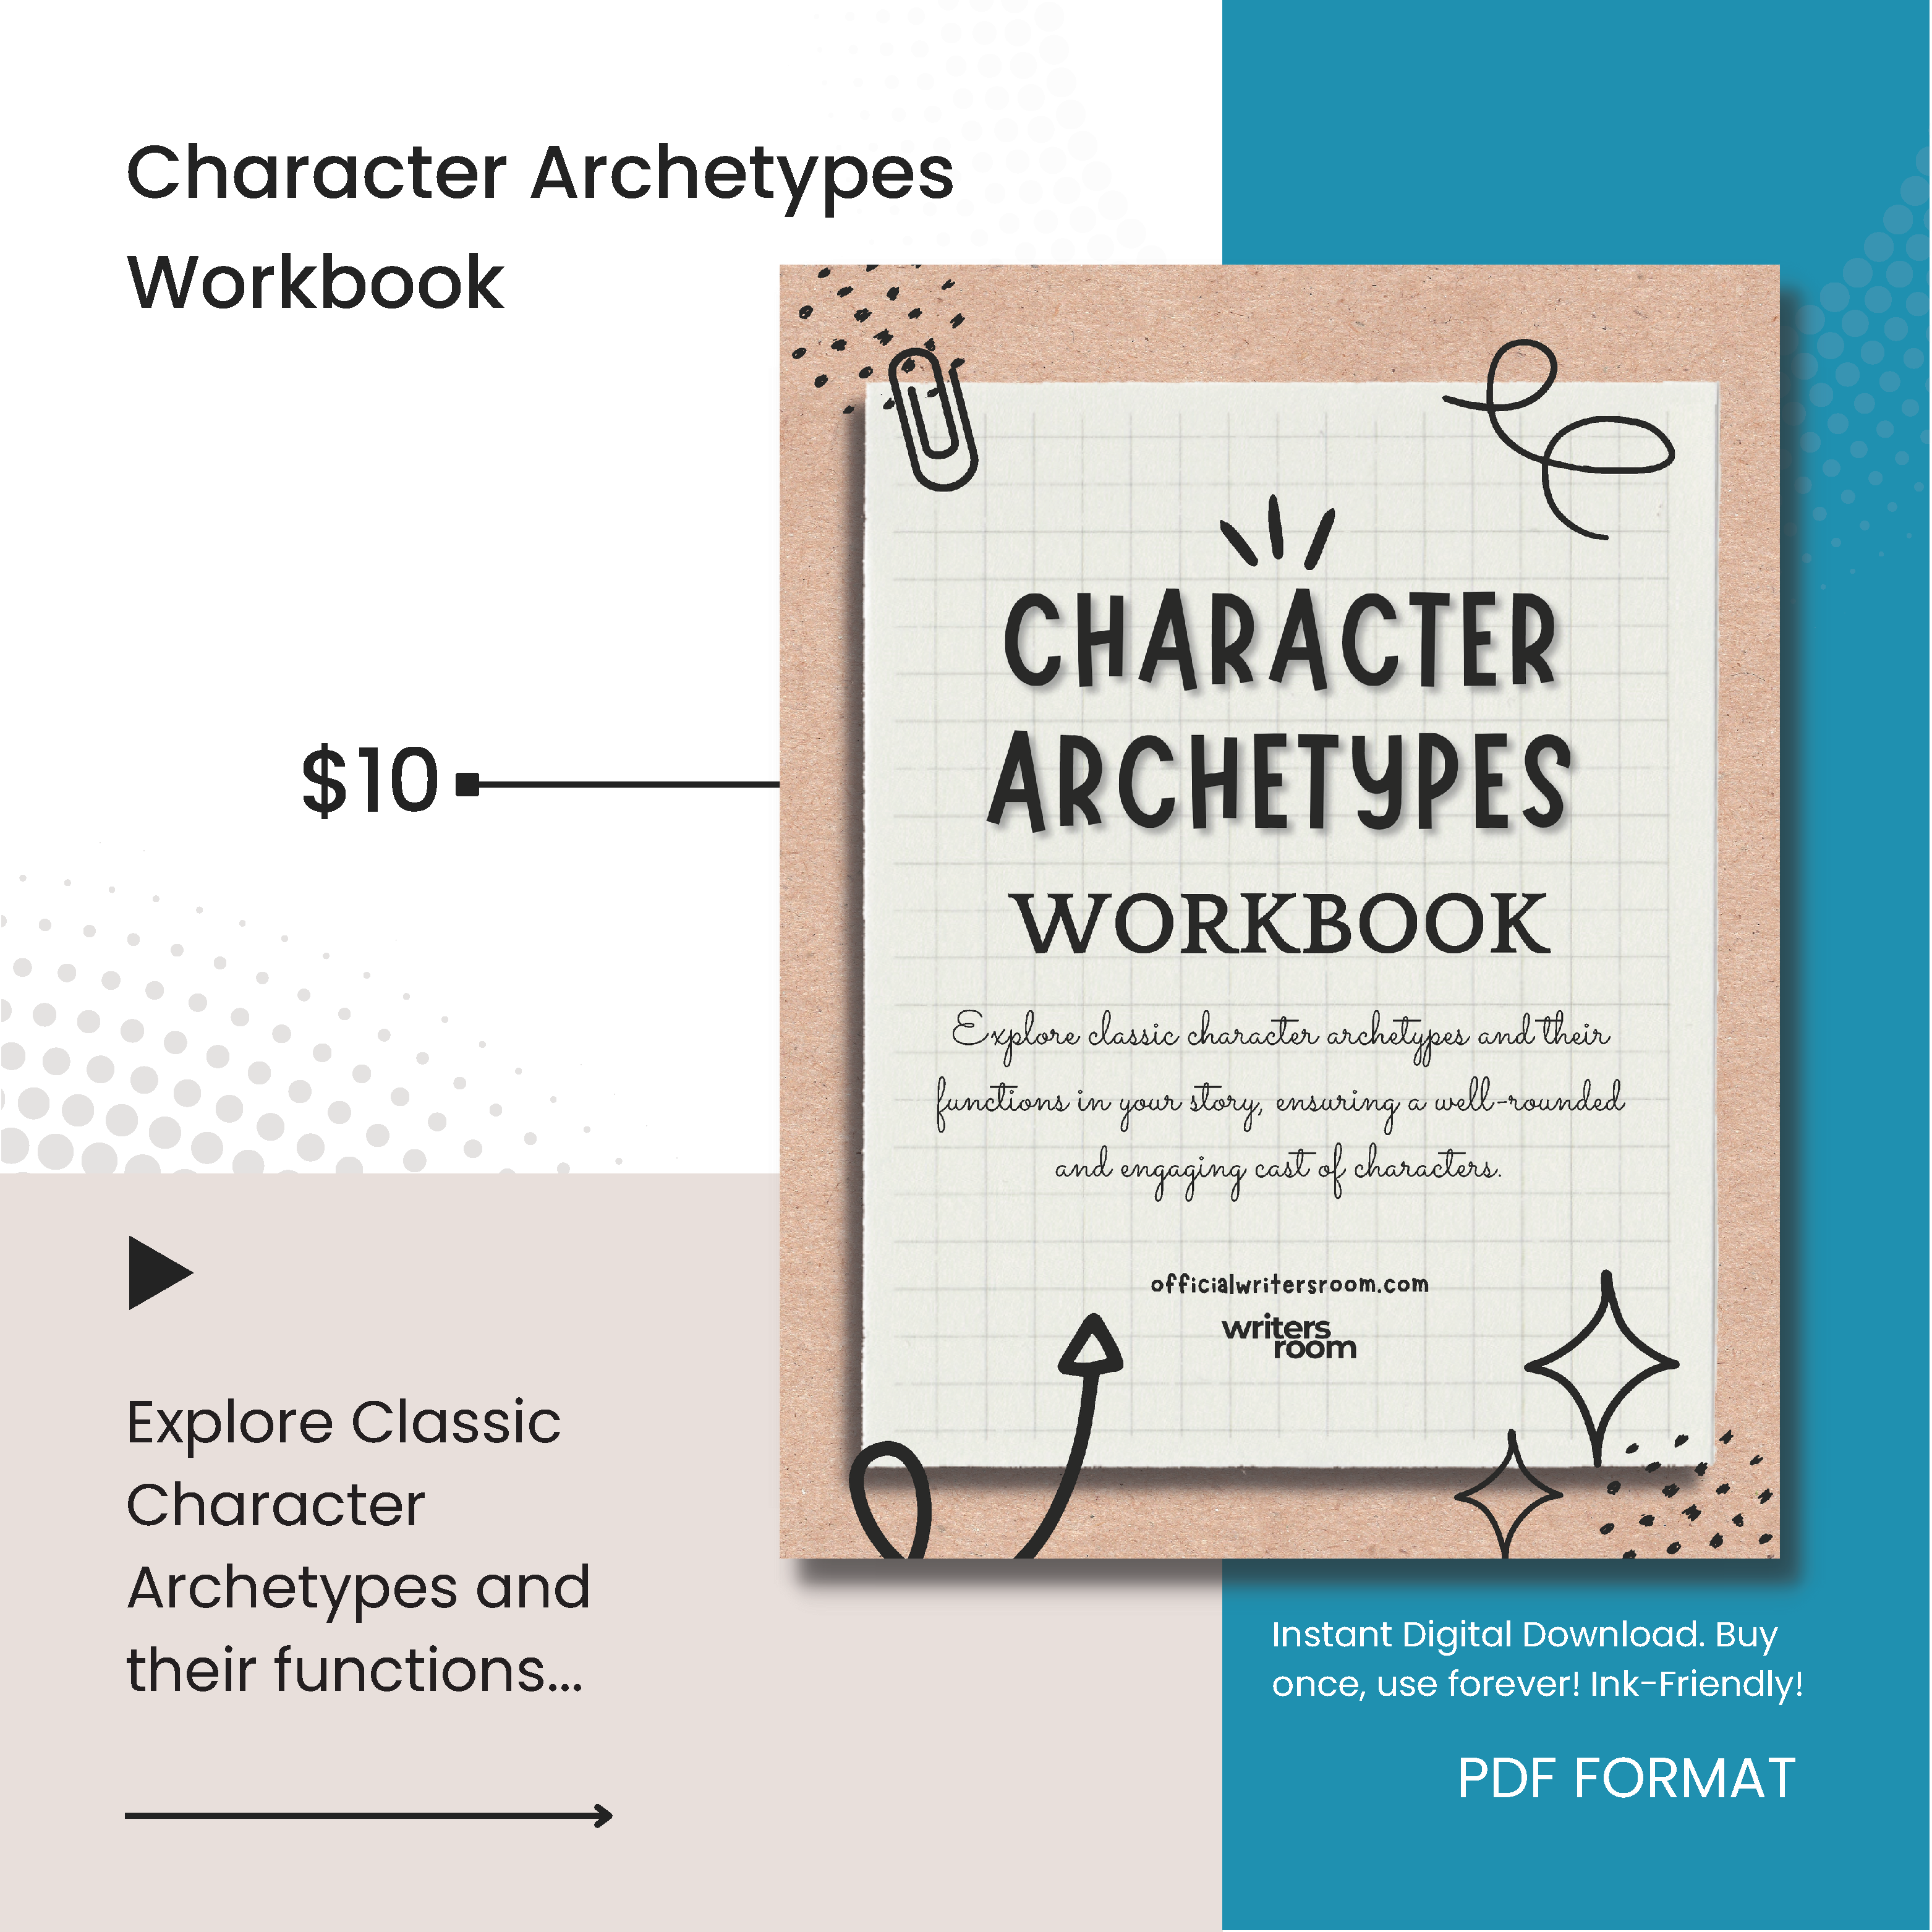 Writer Character Archetype Workbook - book cover shown